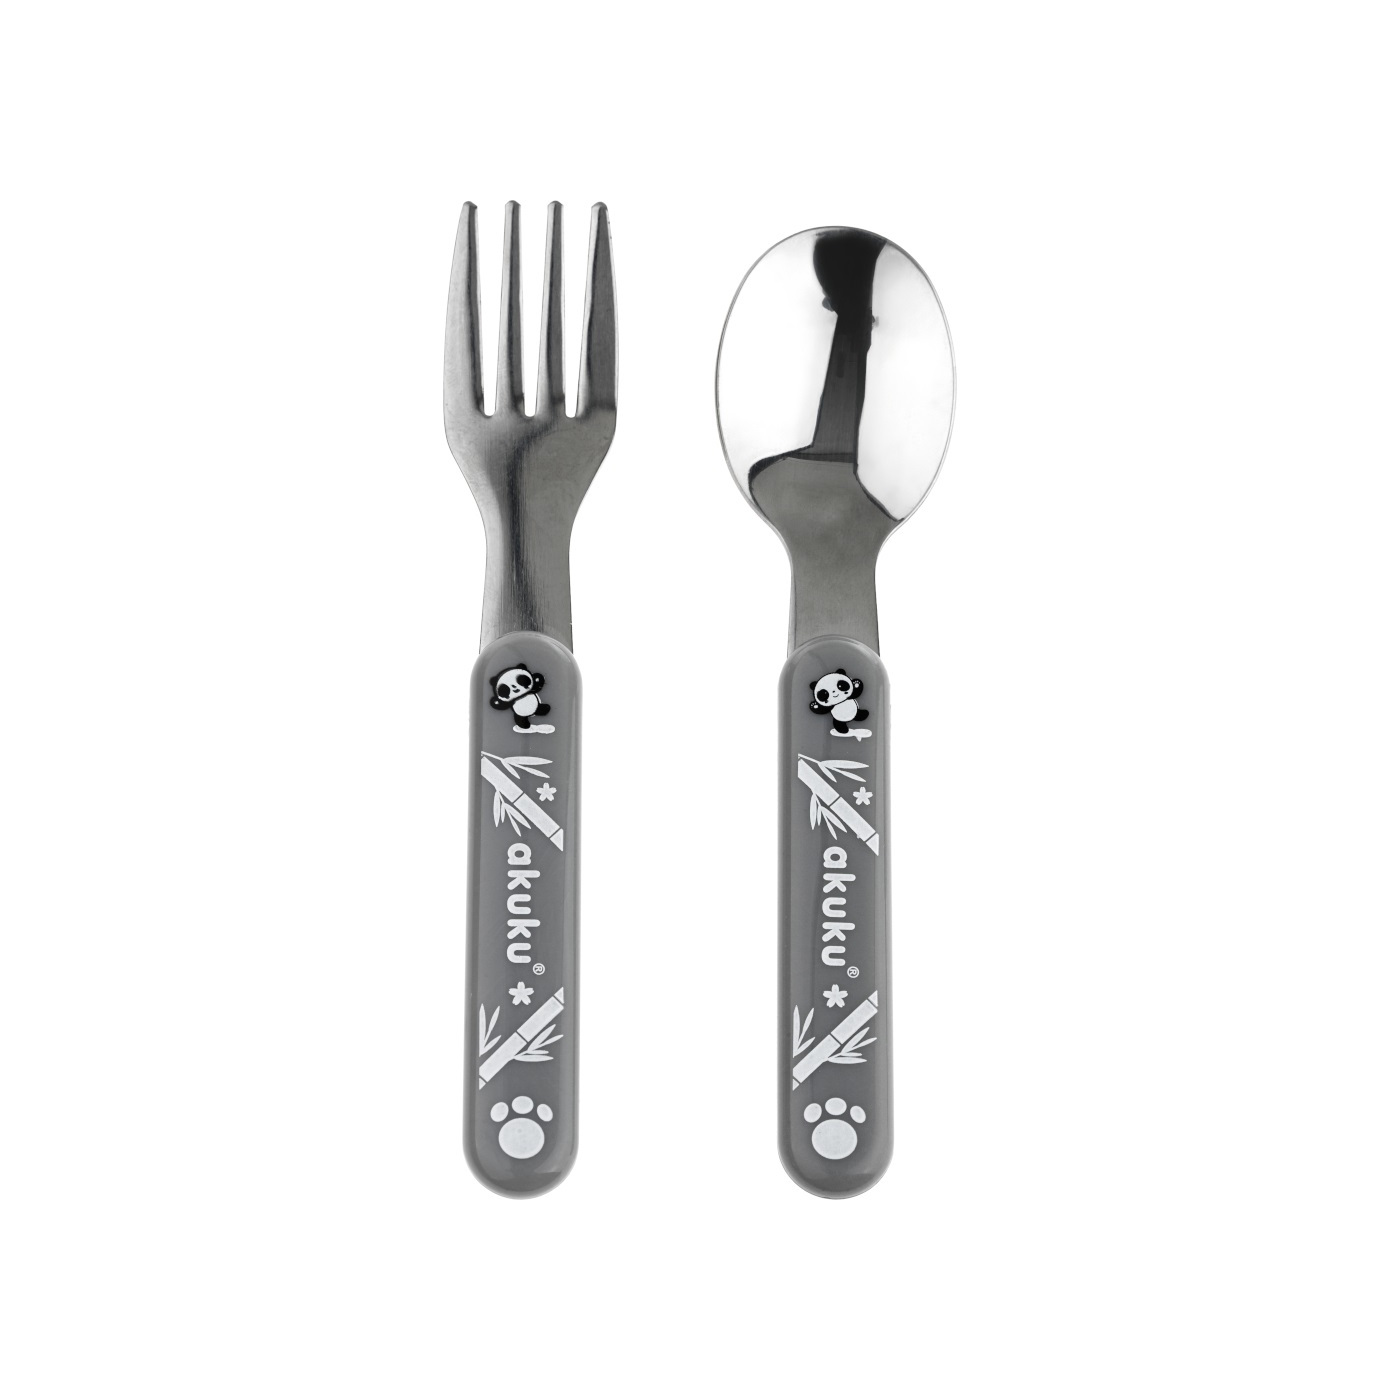 Stainless steel spoon and fork A0100